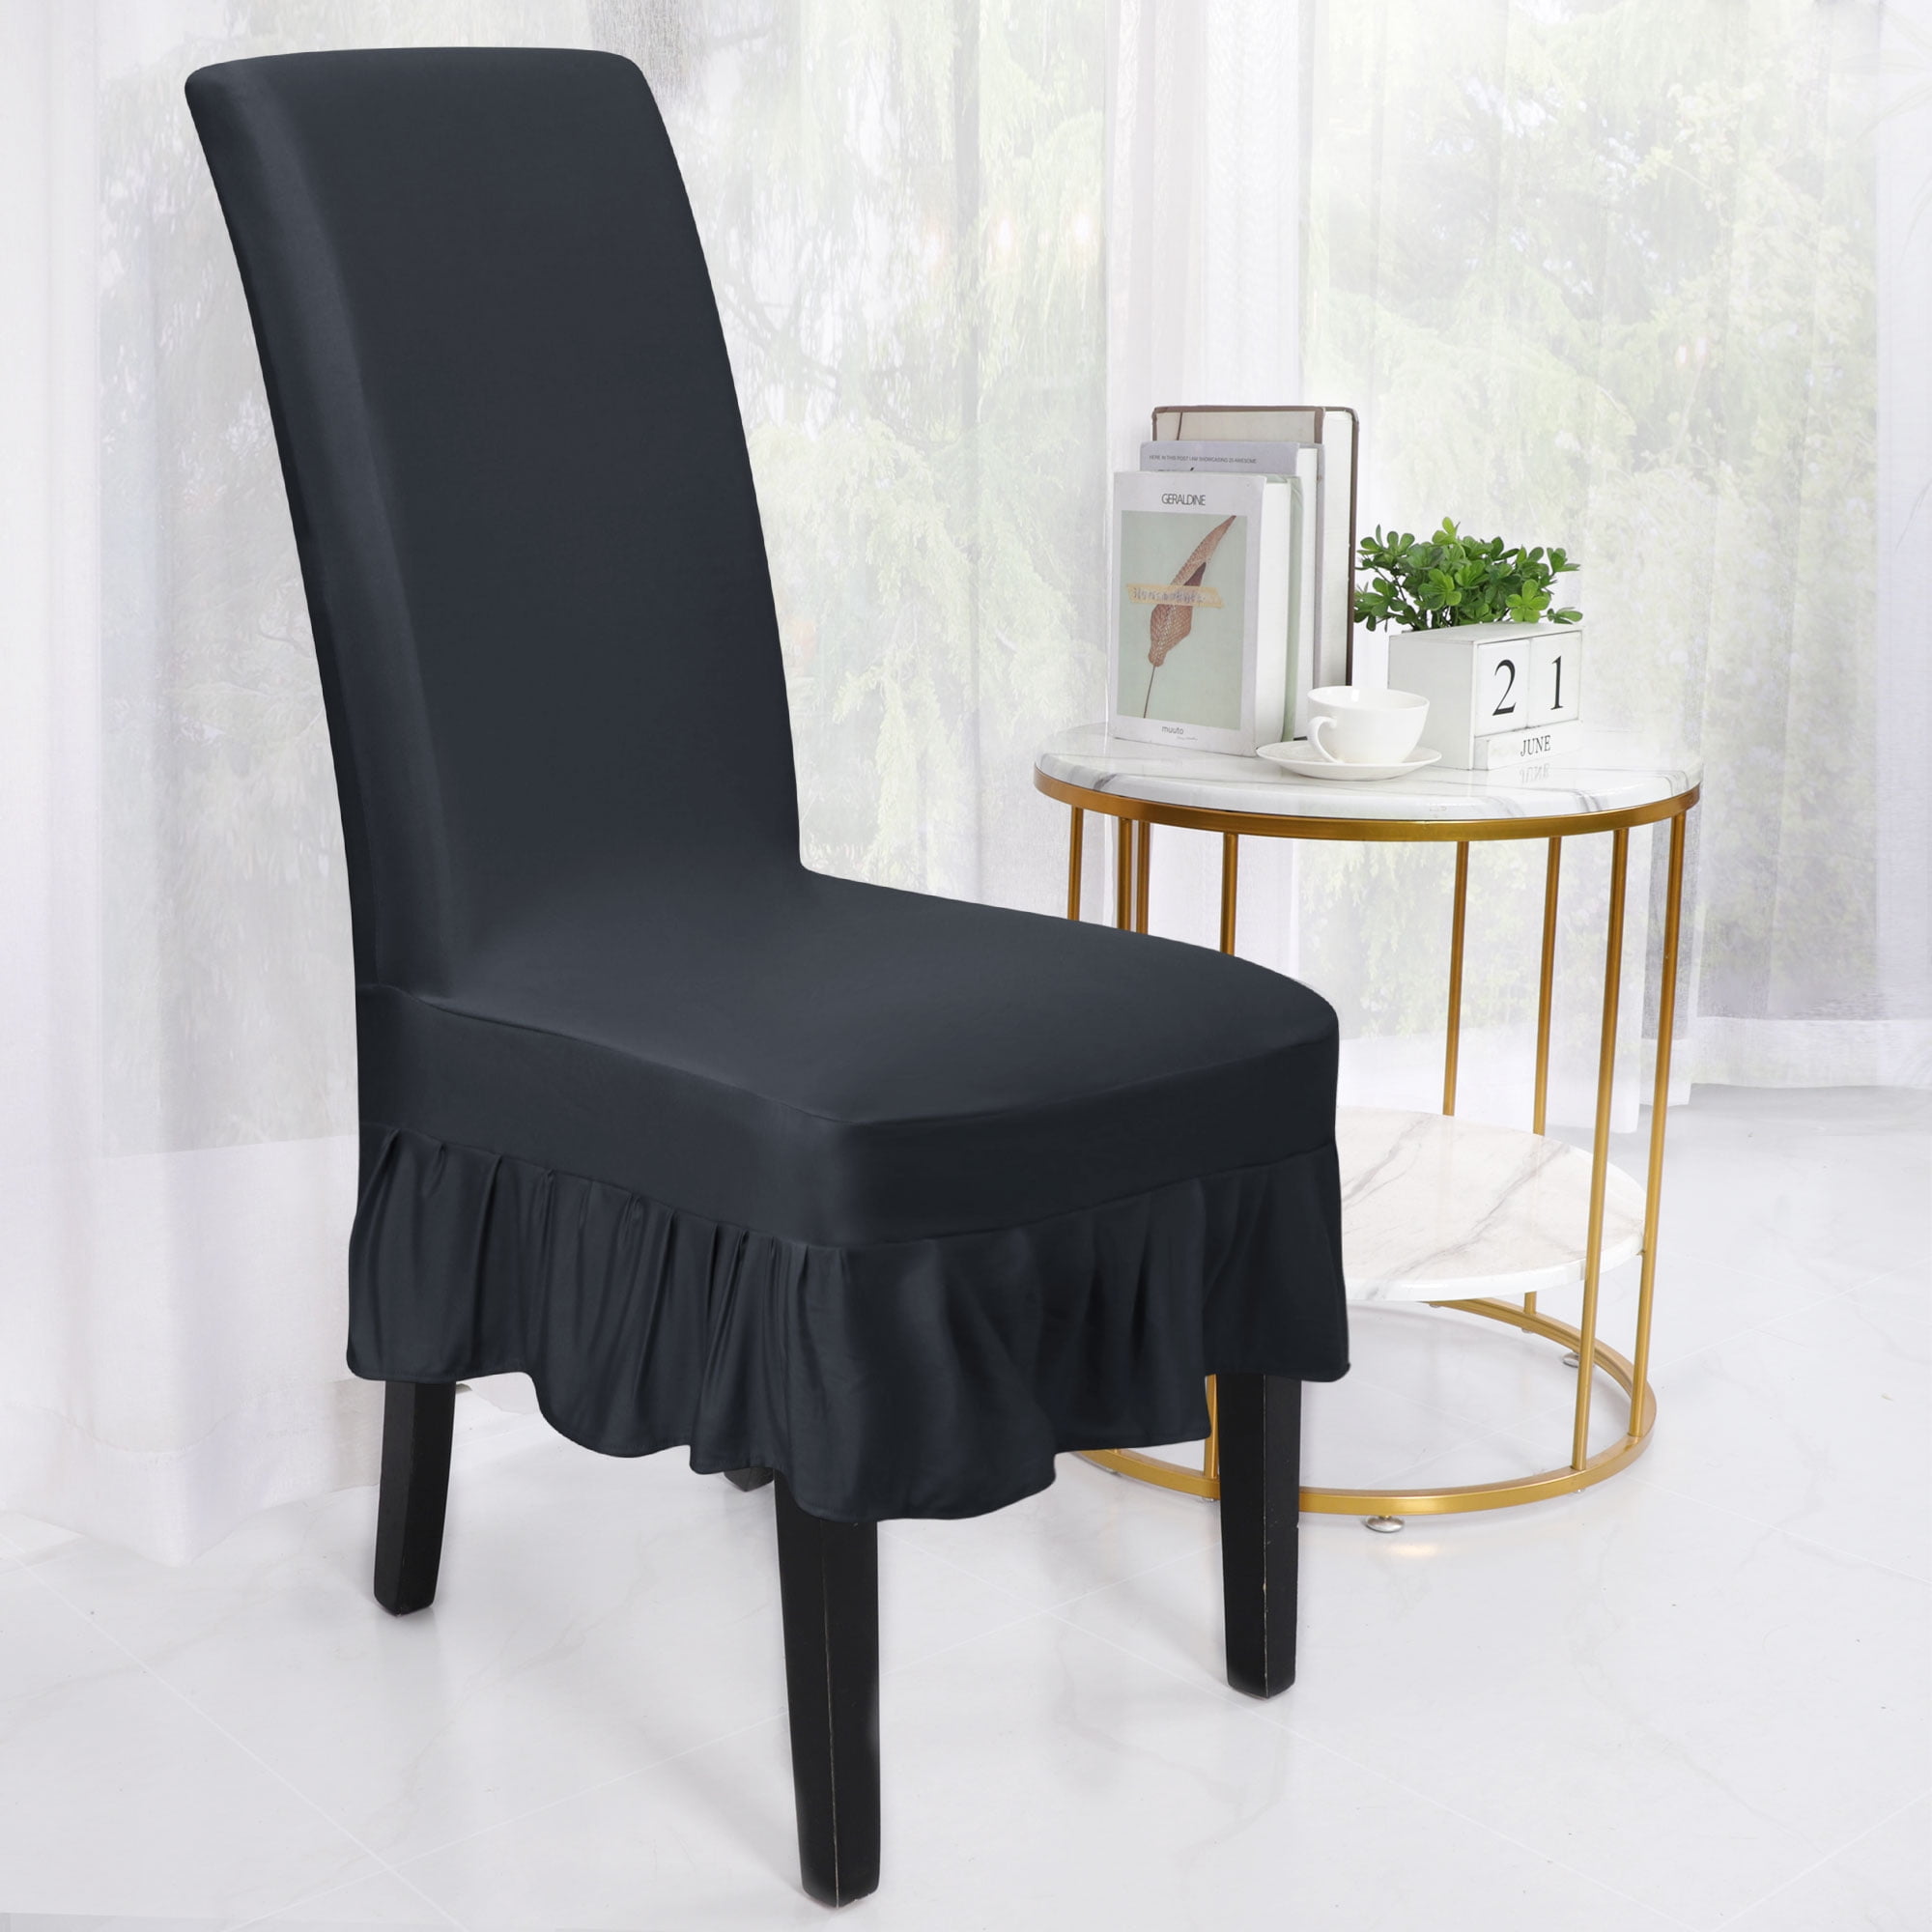 Details about   Chair Cover Seat Protector For Home Hotel Office Spandex Split Computer Hotels 